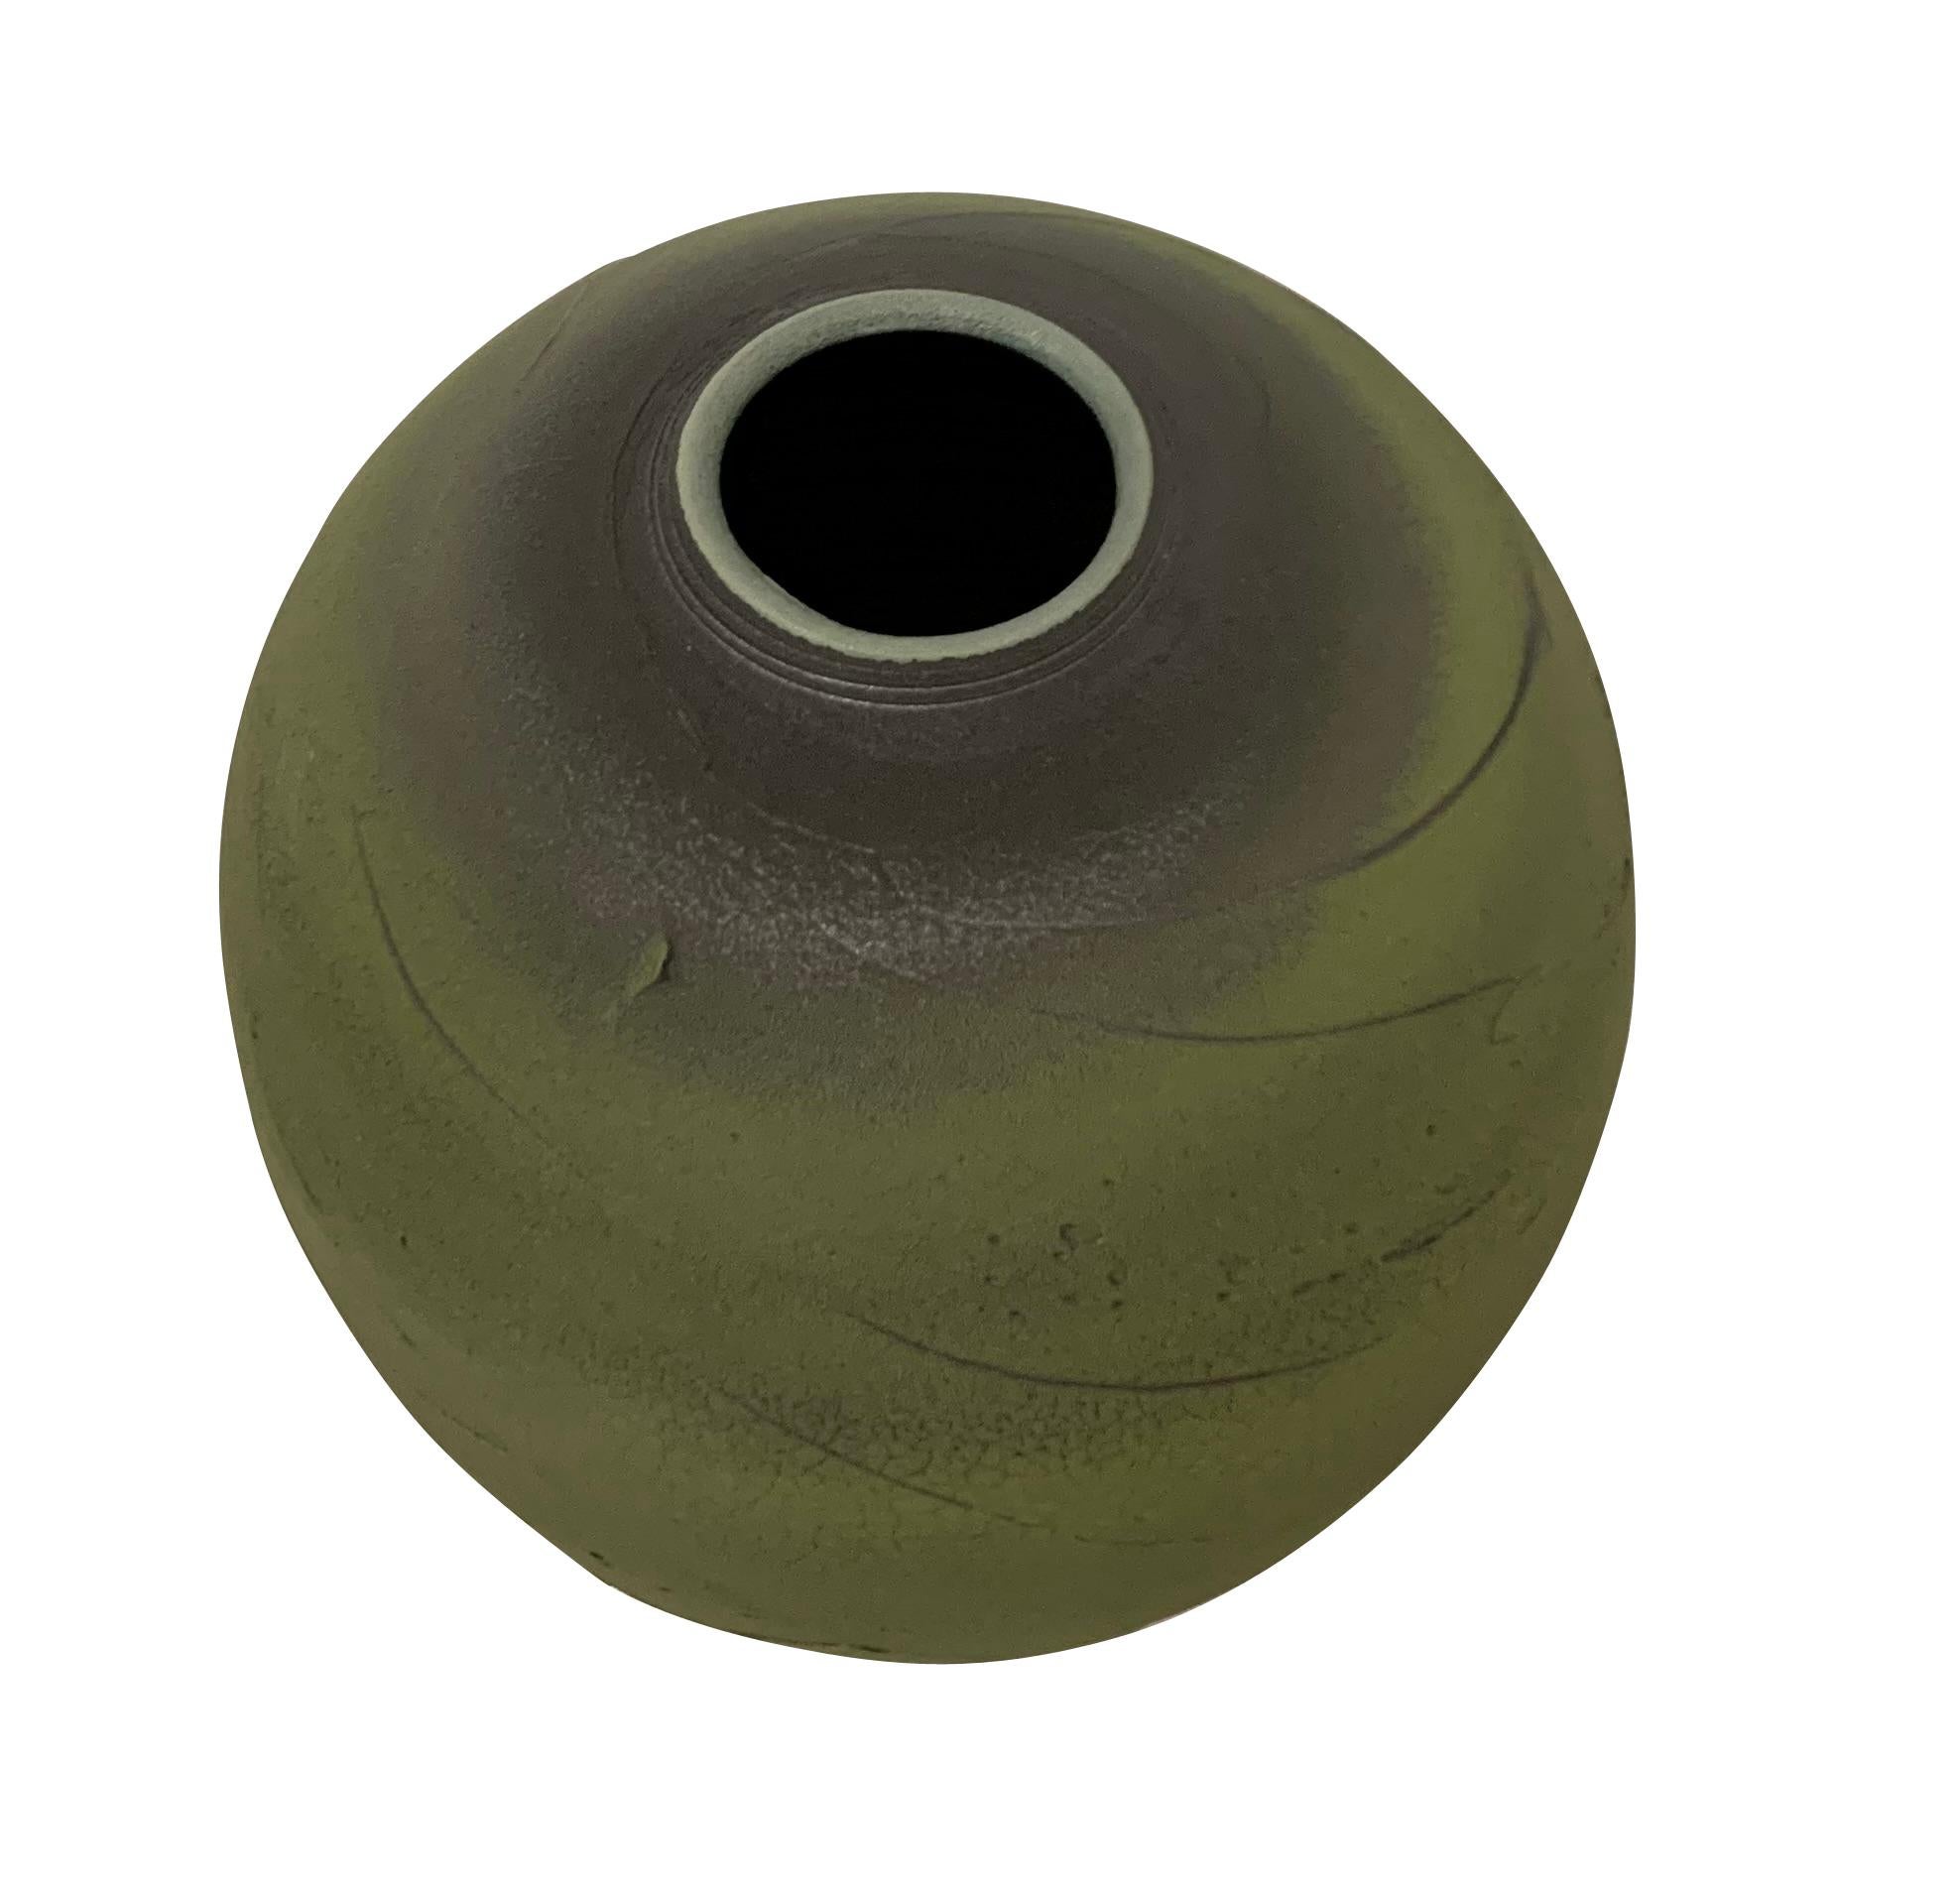 Contemporary textured ceramic earthenware vase.
A large, classic shaped textural green body with grey that appears to be air brushed at the top opening and bottom of the vase.
The vase design has an ancient feel.
Hand made one of a kind.
Part of